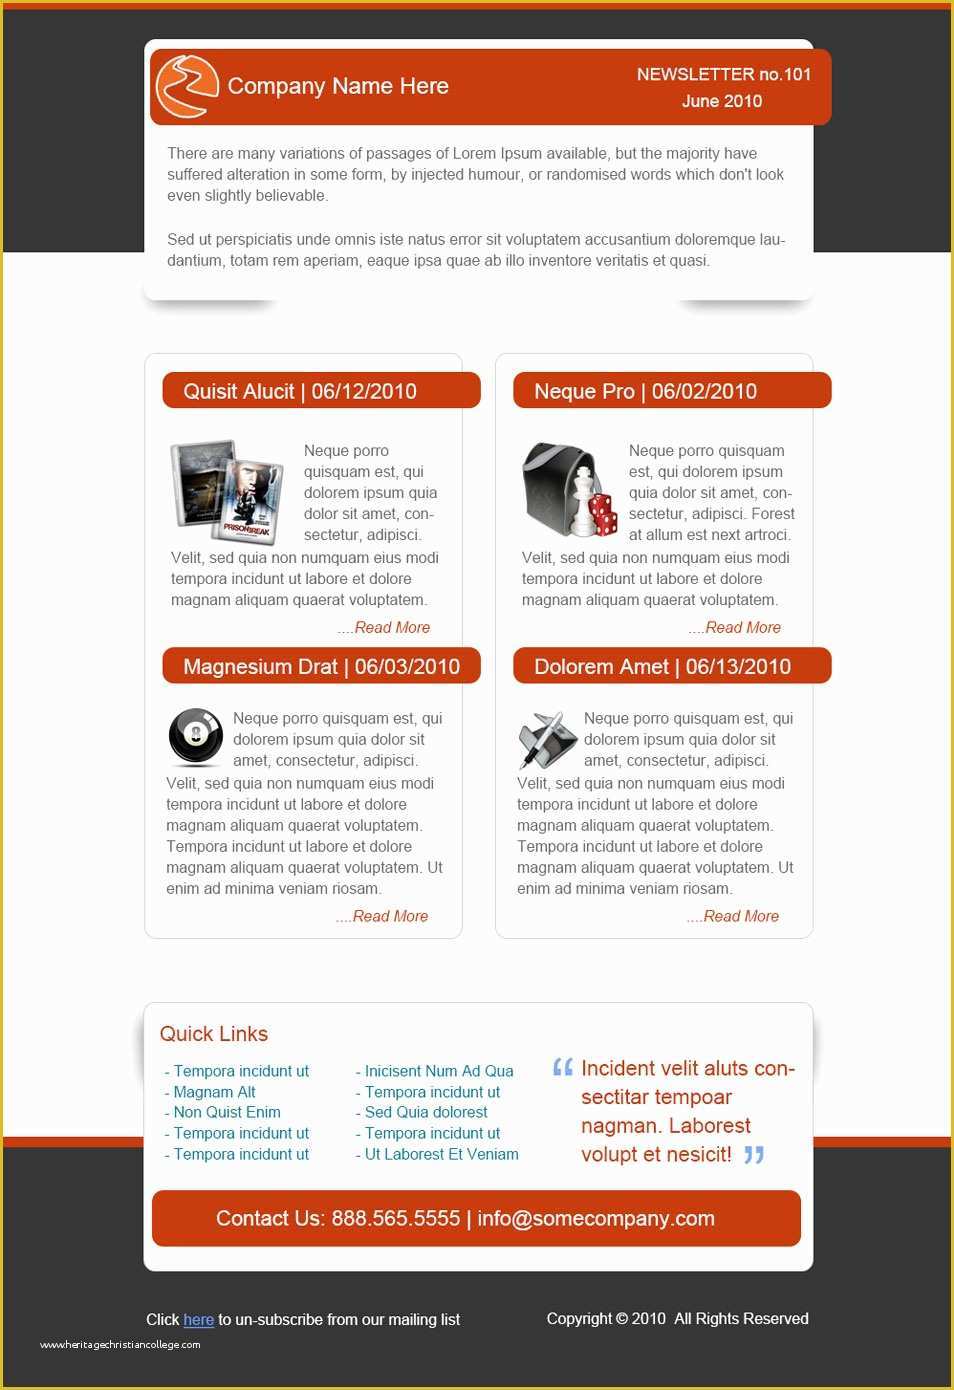 Newsletter Templates Email Free Of Best Free Email Newsletter Design Templates Latest